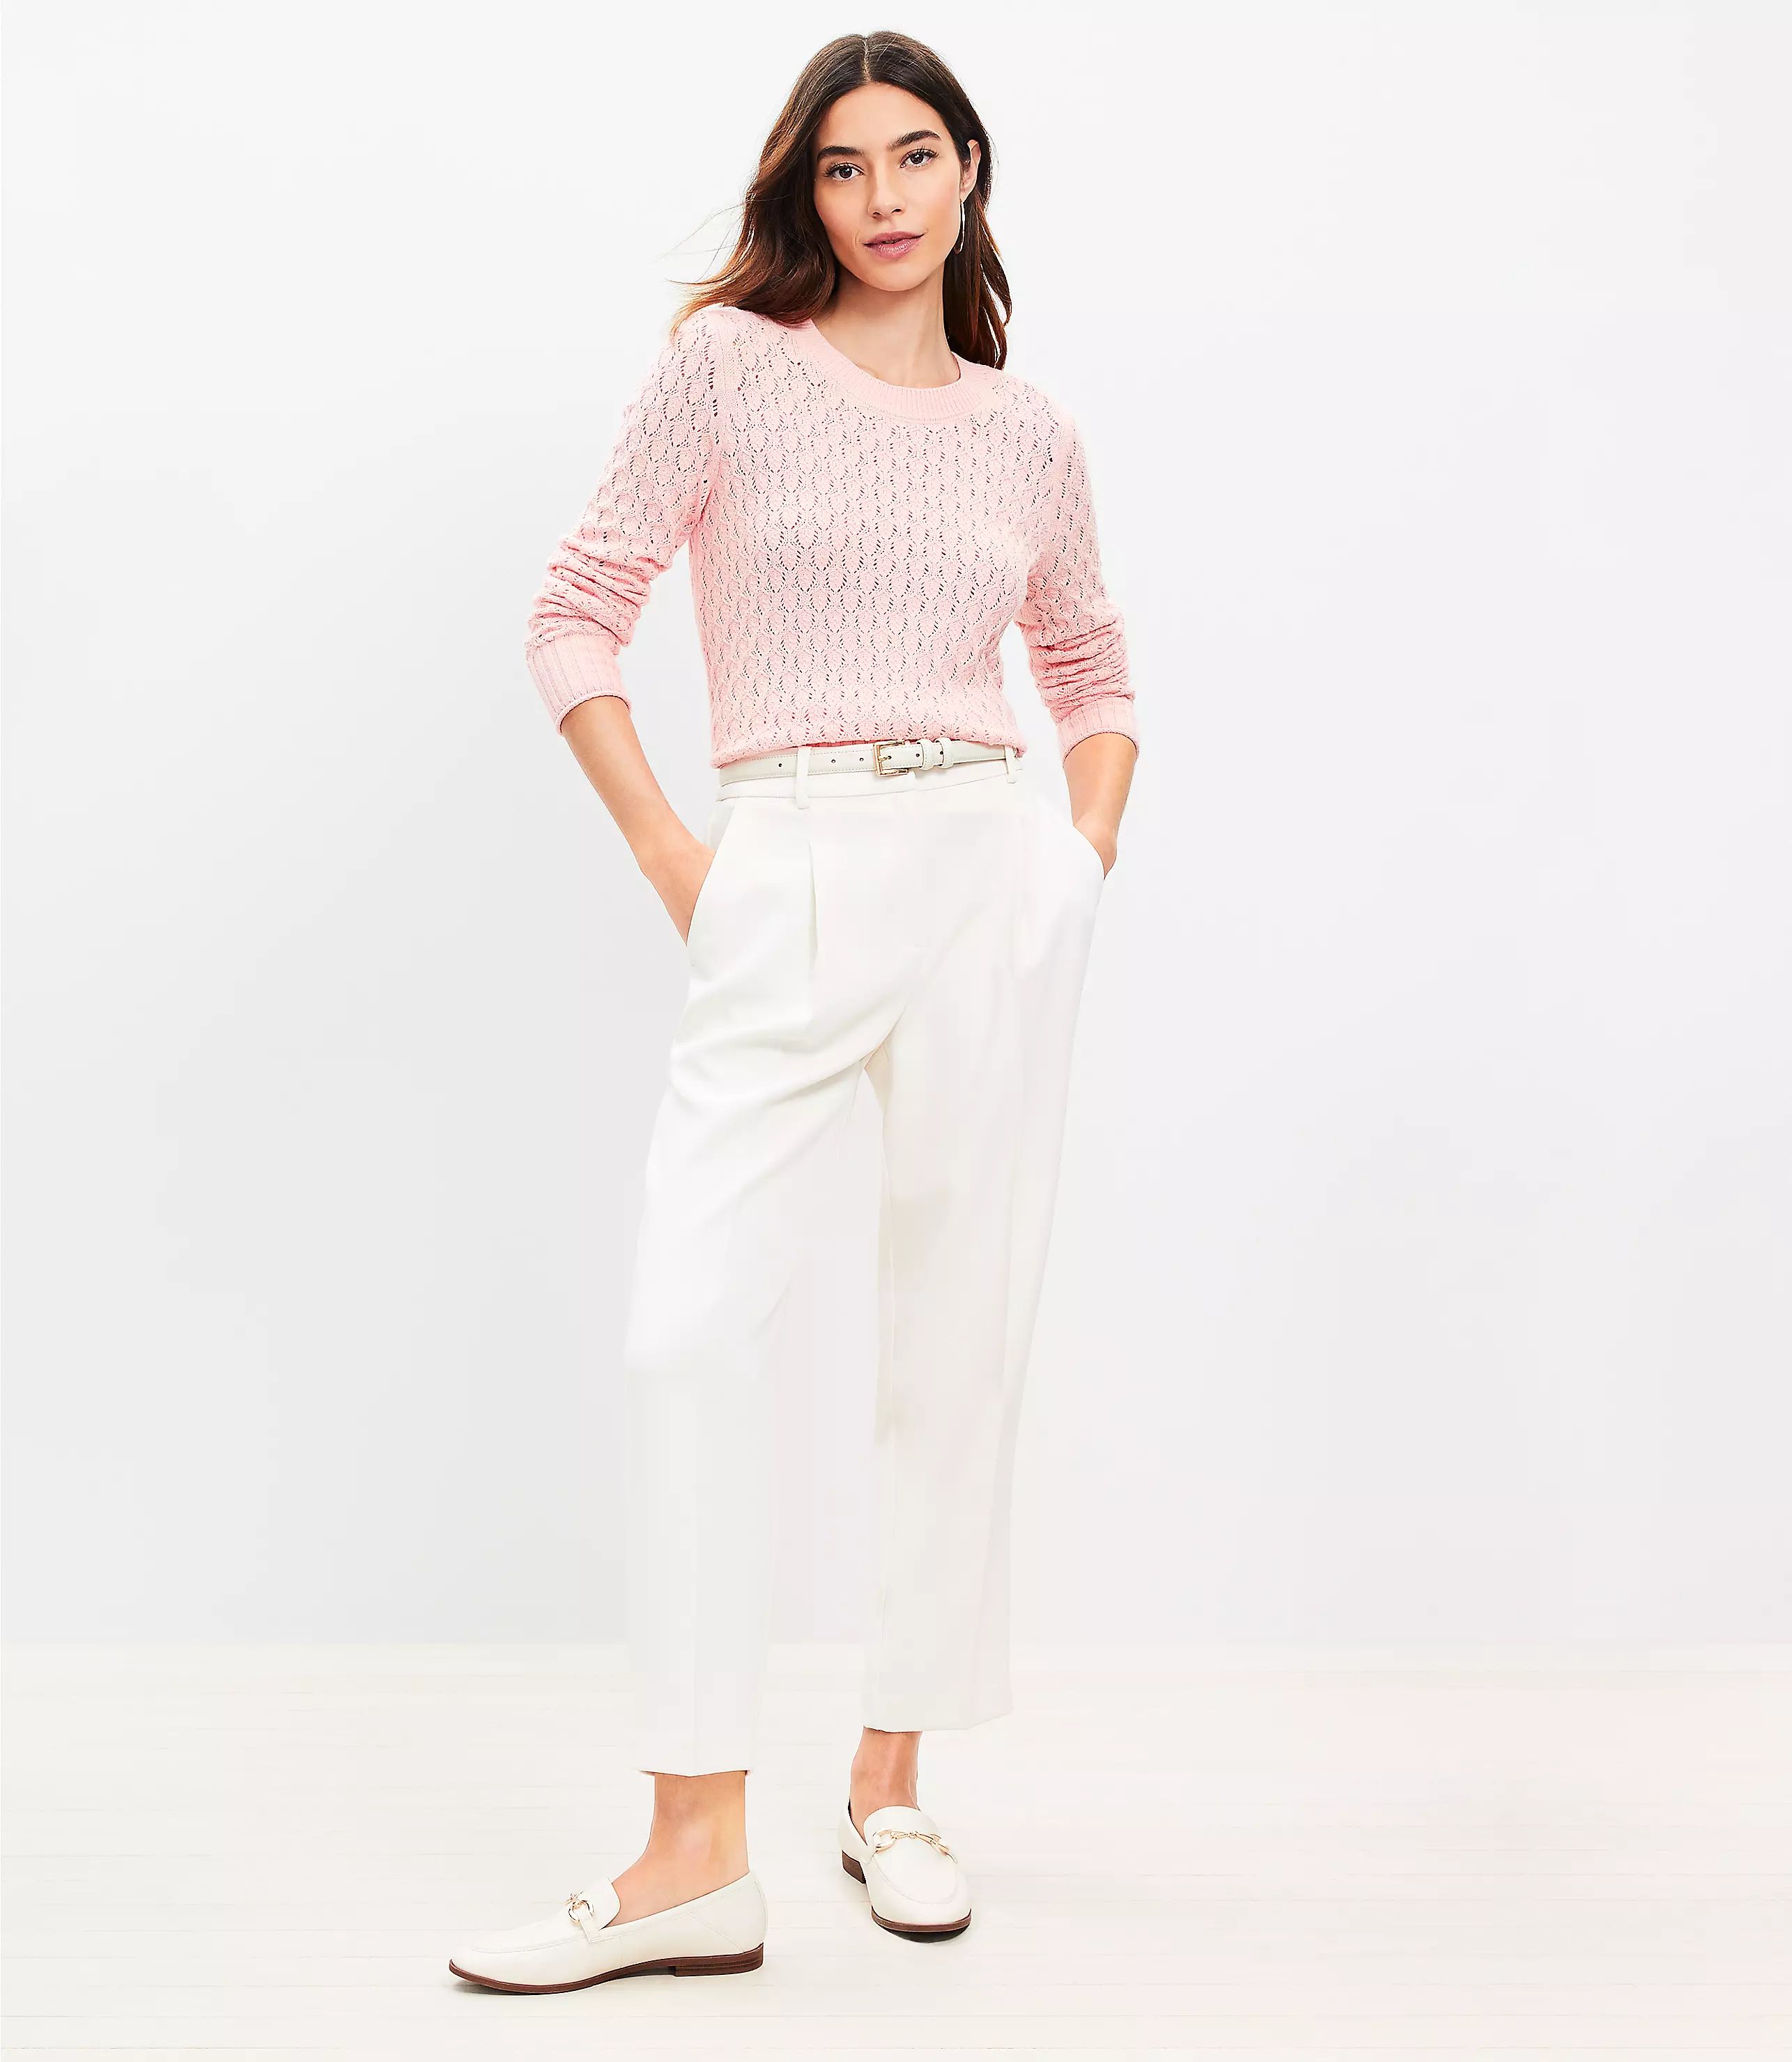 Pleated Tapered Pants in Crepe | LOFT